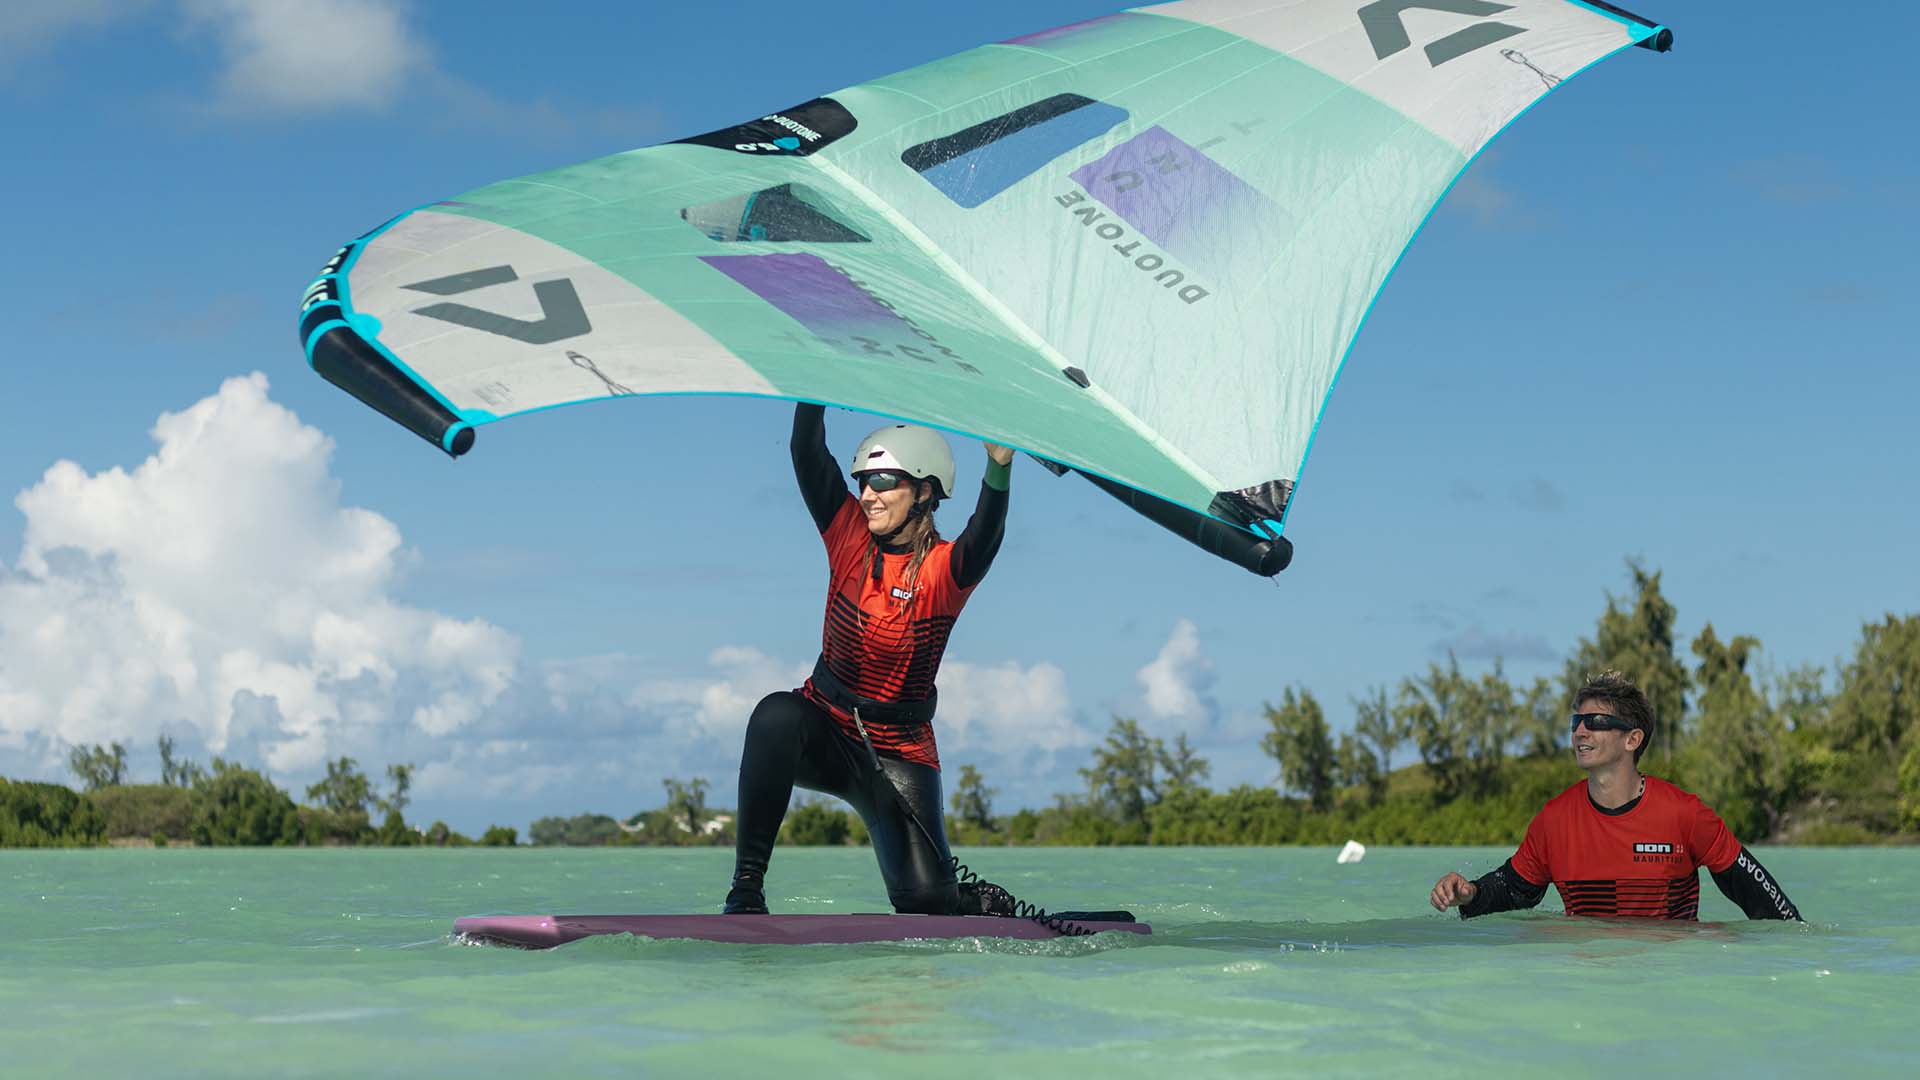 wingfoil lessons in turquoise water<br />
